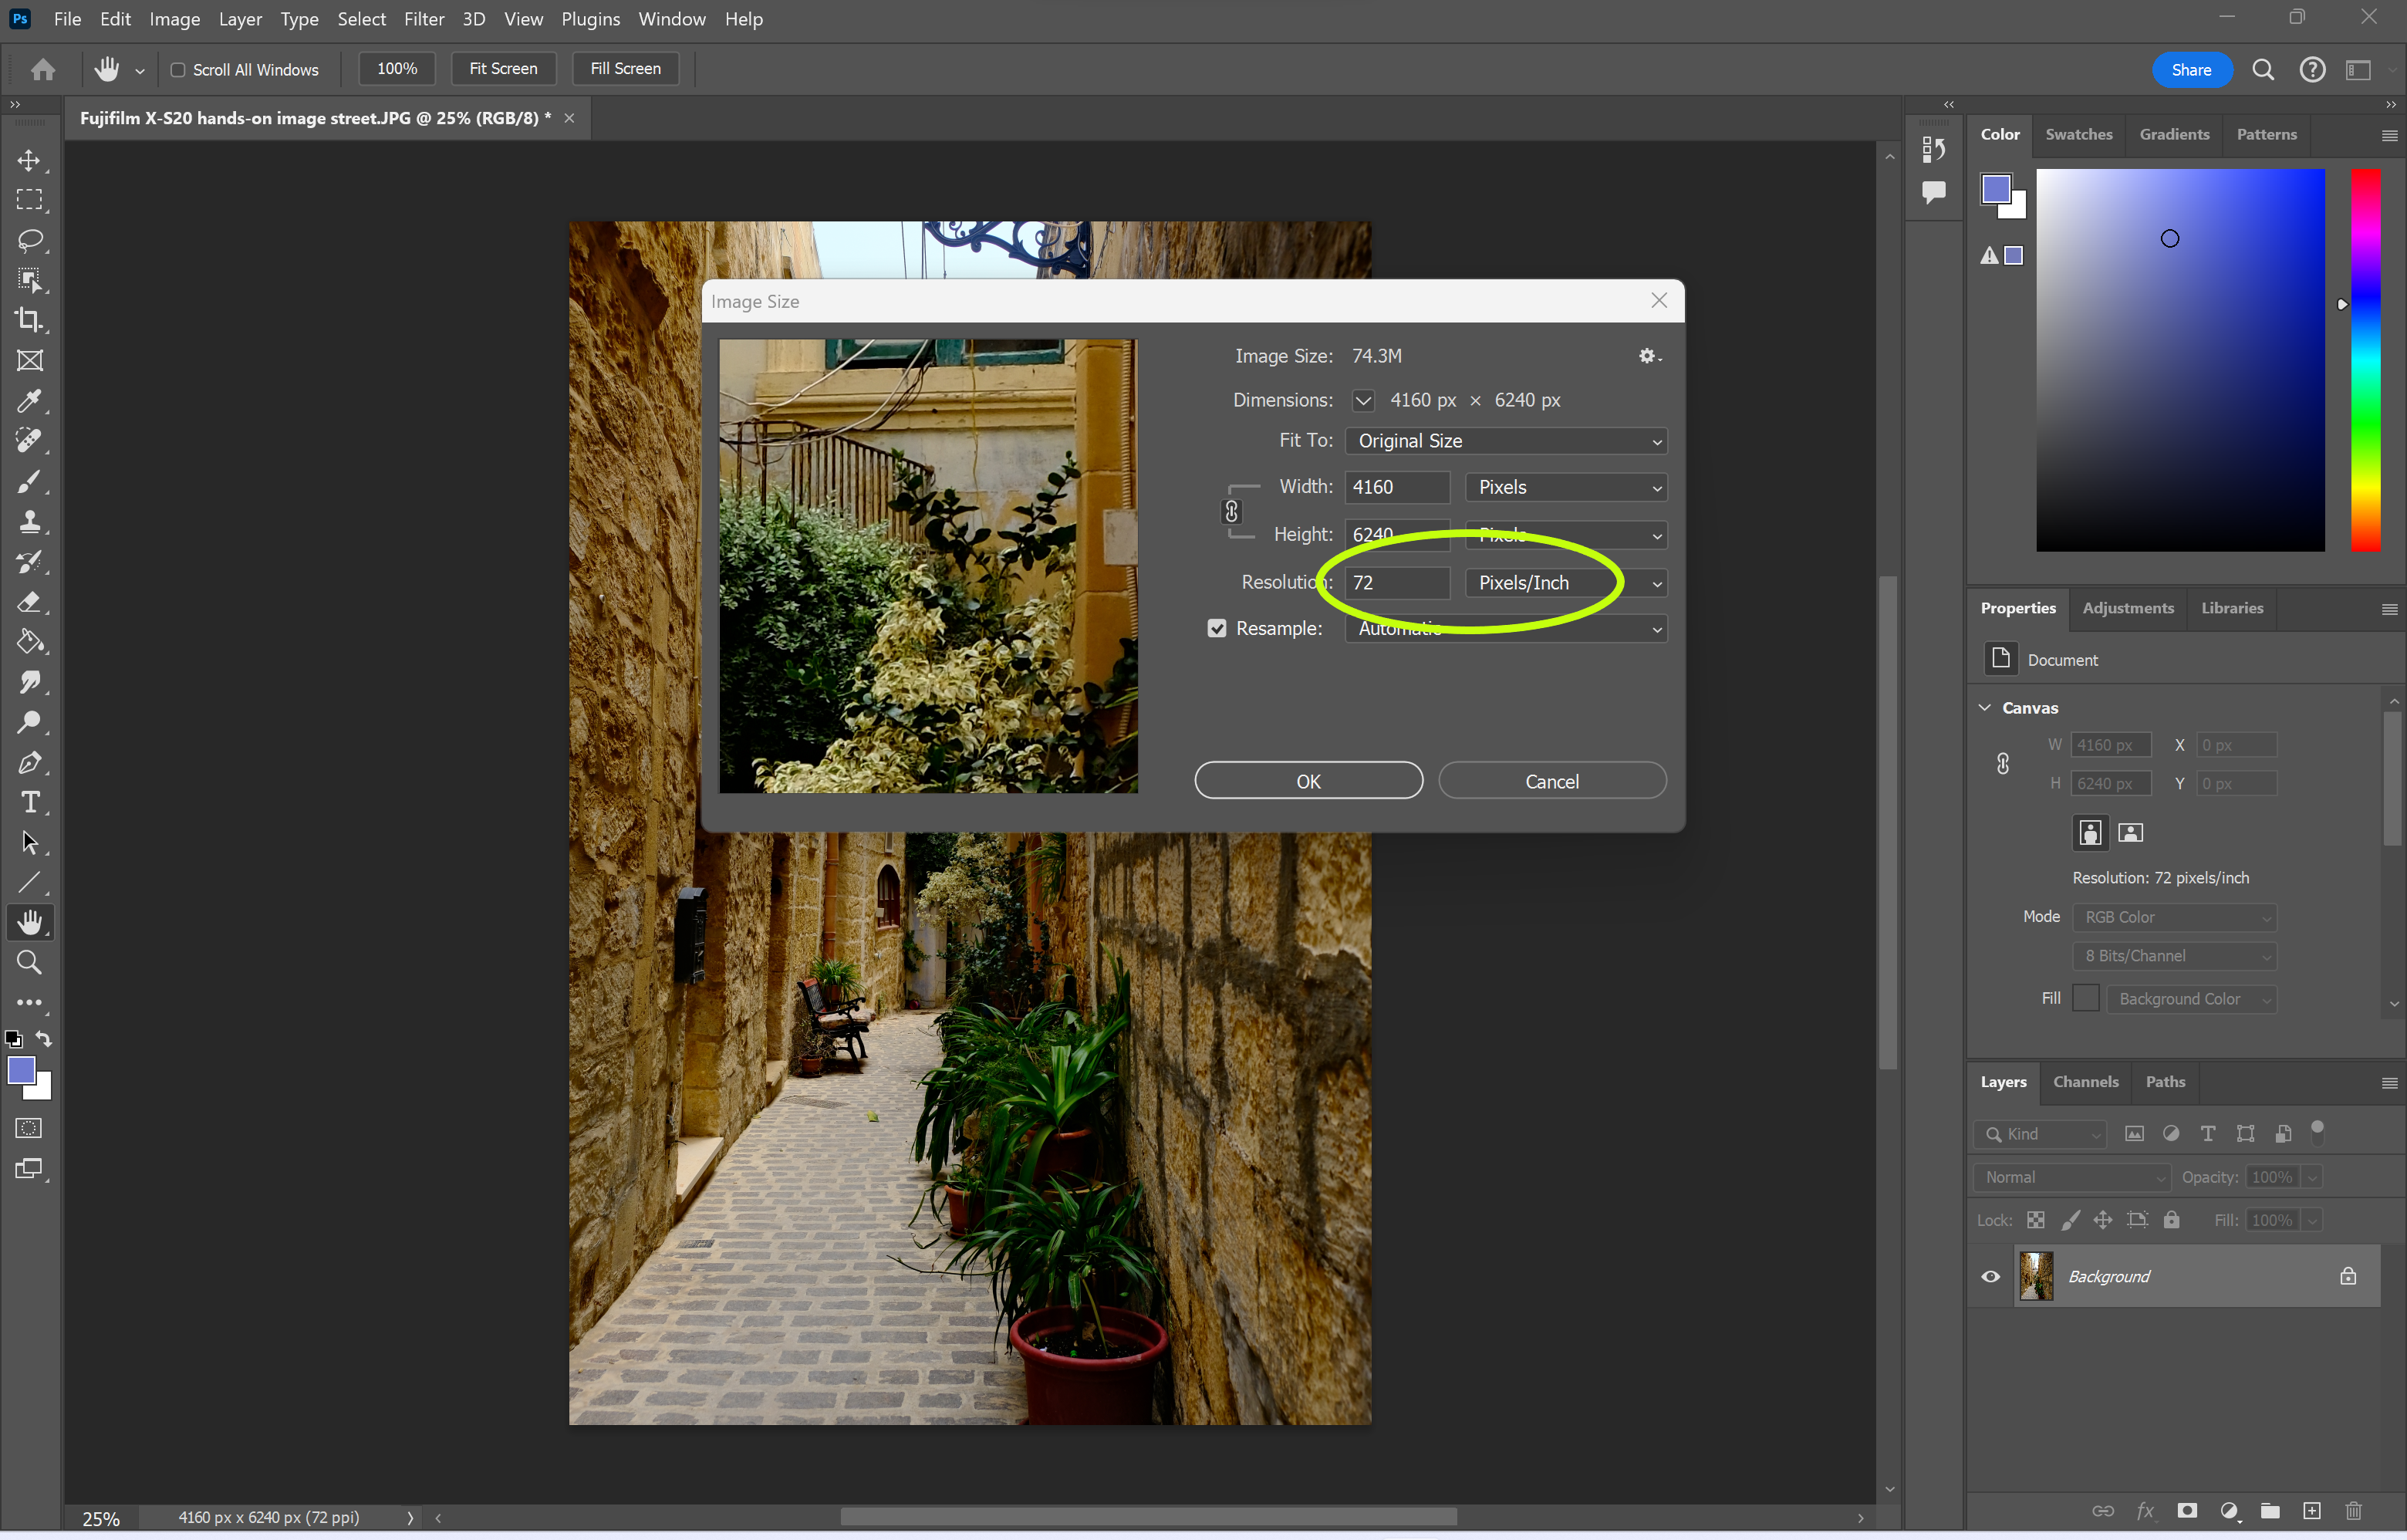 How to change the DPI in Photoshop